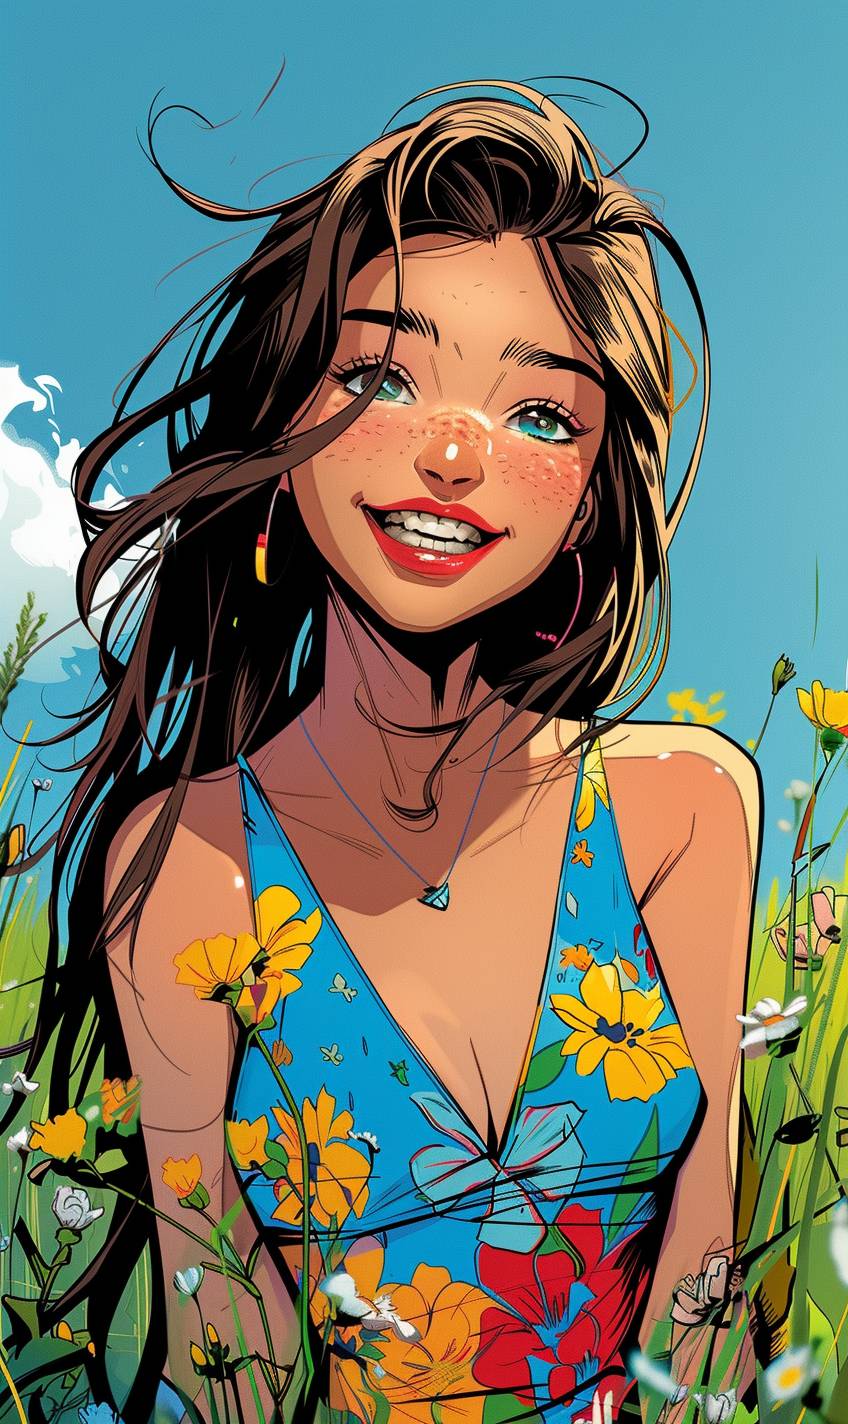 A girl with long brown hair and a bright smile, wearing a colorful dress, stands in a lush green meadow with wildflowers blooming around her. The sun is setting, casting a warm glow over the scene. The style is whimsical and vibrant, with lively colors and playful details. The overall mood is joyful and carefree, capturing the innocence and beauty of youth.